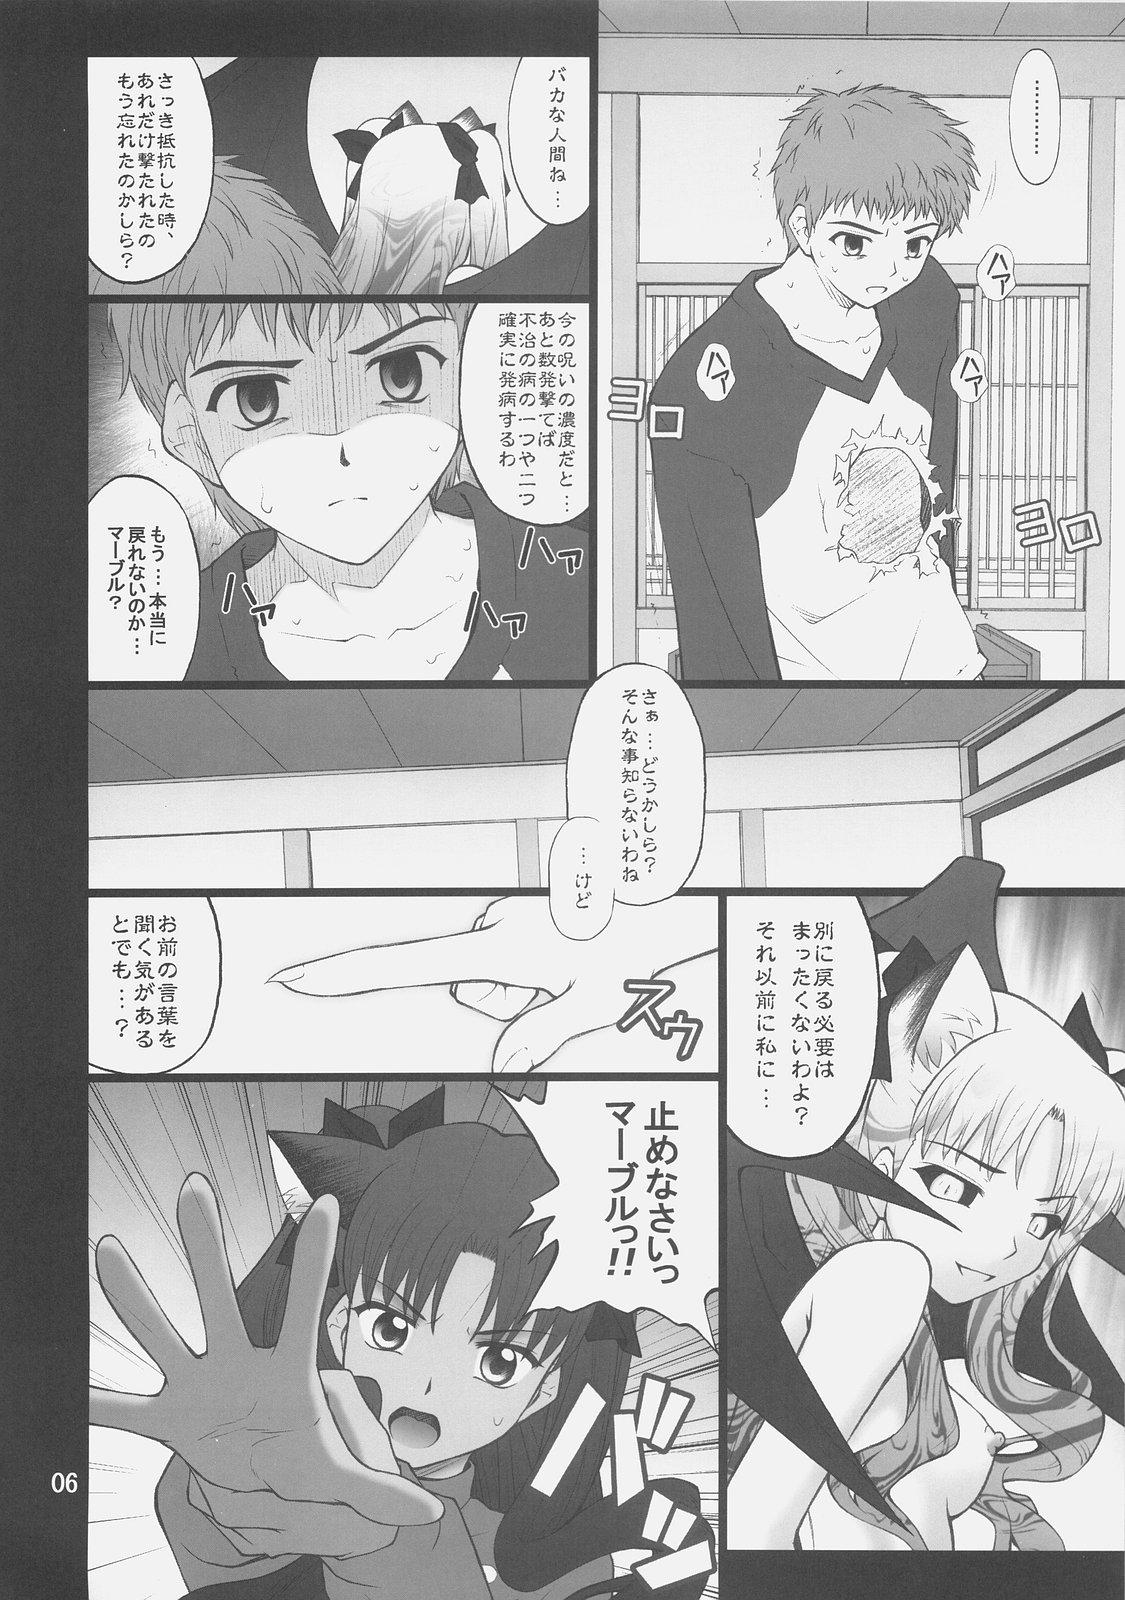 Enema Grem-Rin 4 - Fate stay night Fate hollow ataraxia Handsome - Page 5